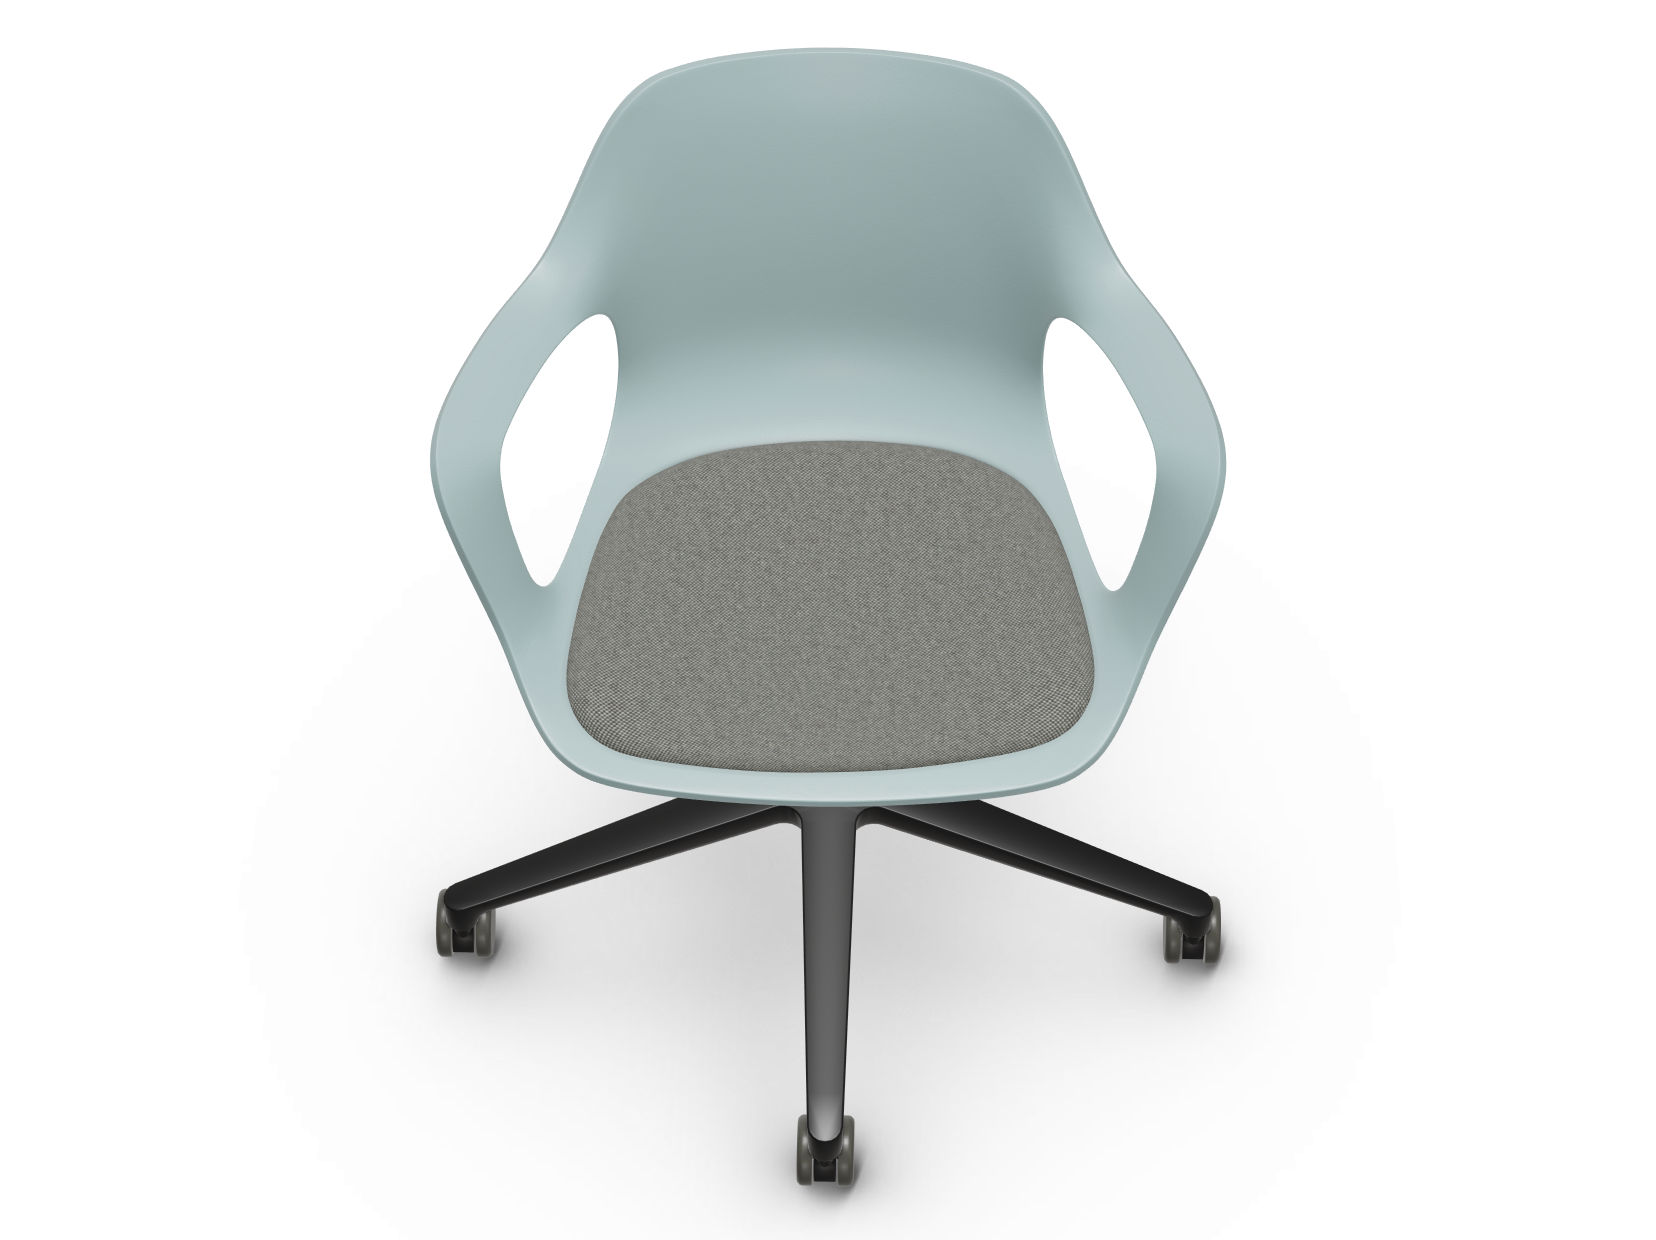 HAL Studio is an office chair designed by Jasper Morrison and offered by Peverelli